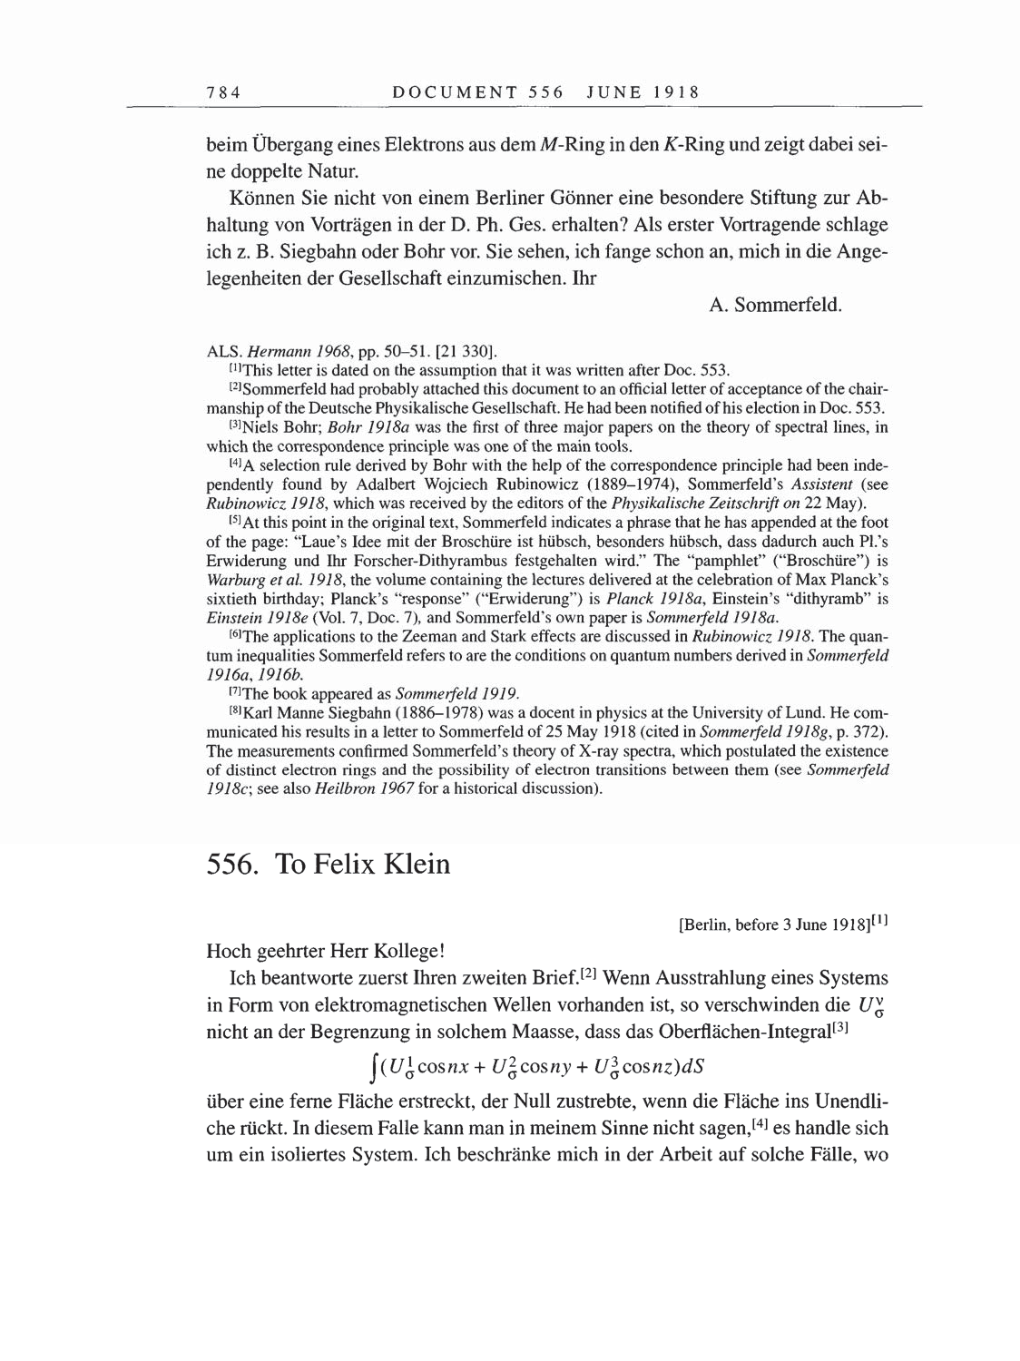 Volume 8, Part B: The Berlin Years: Correspondence 1918 page 784